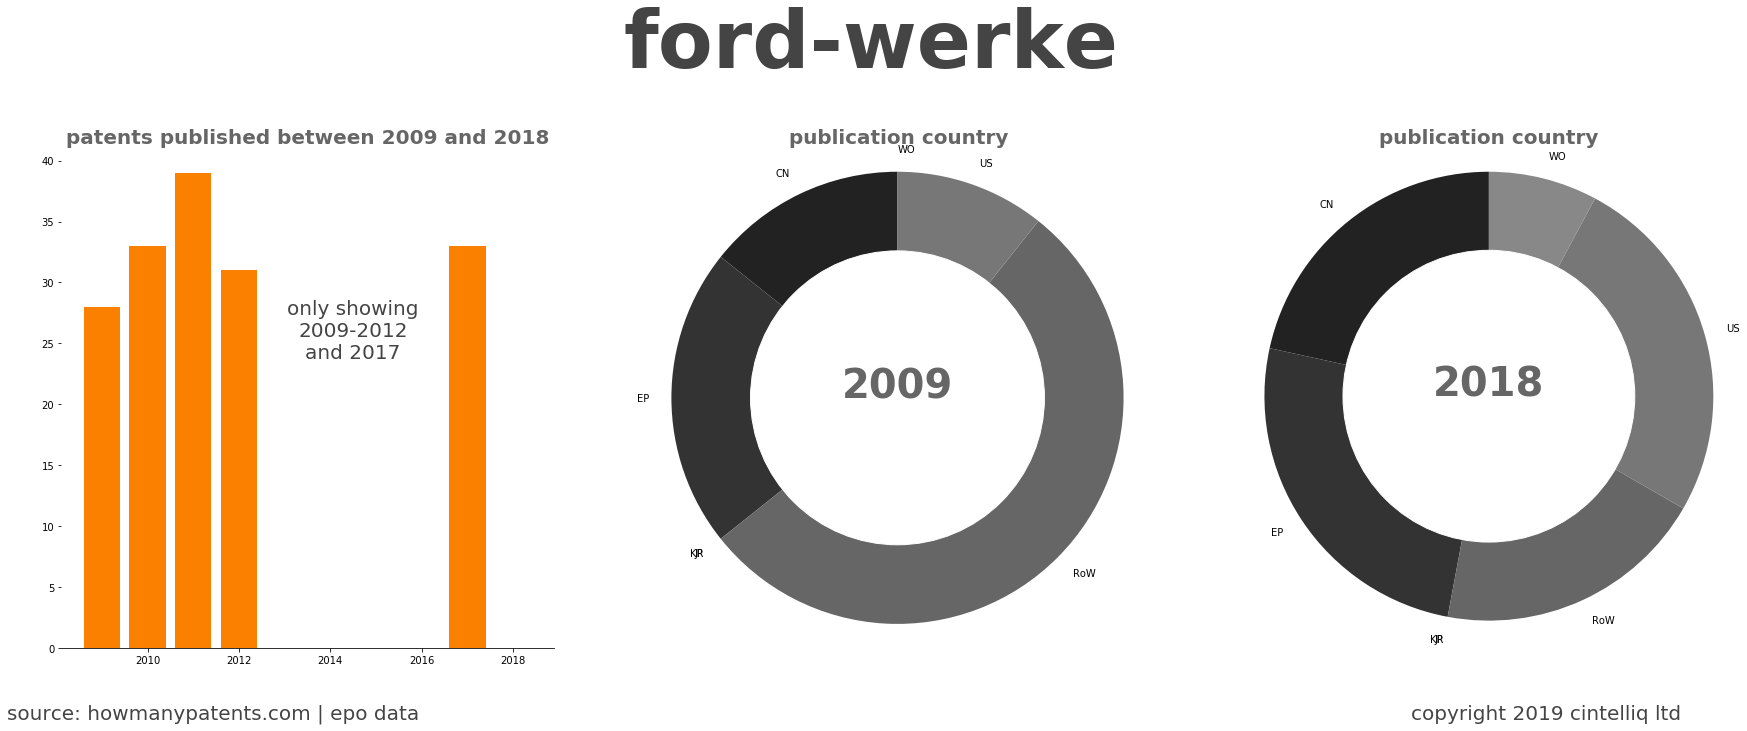 summary of patents for Ford-Werke